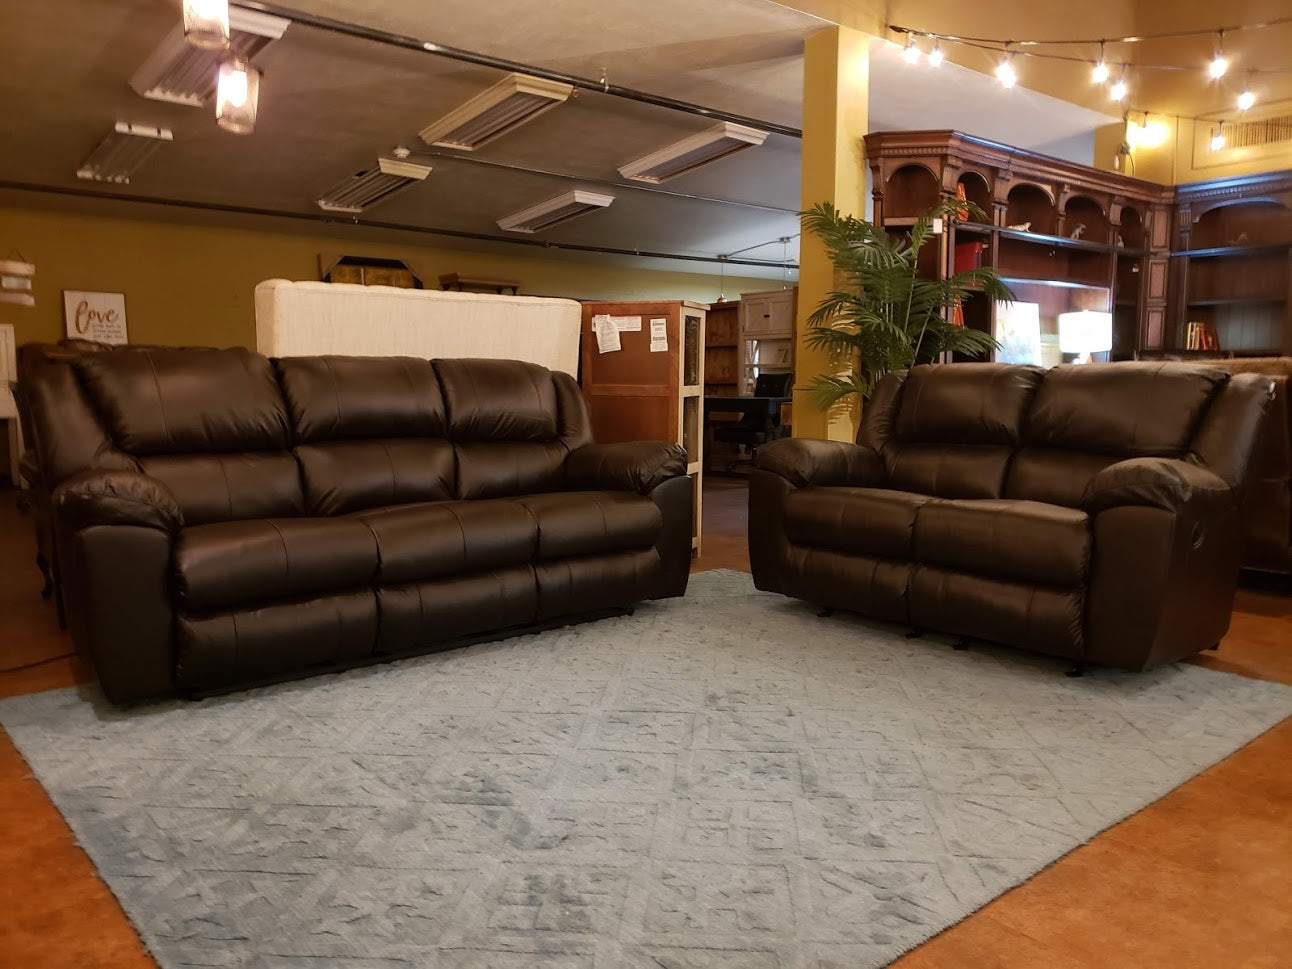 502 FI-CnJ Sofa w/3 Recliners & Drop Down Table and Rocking Loveseat